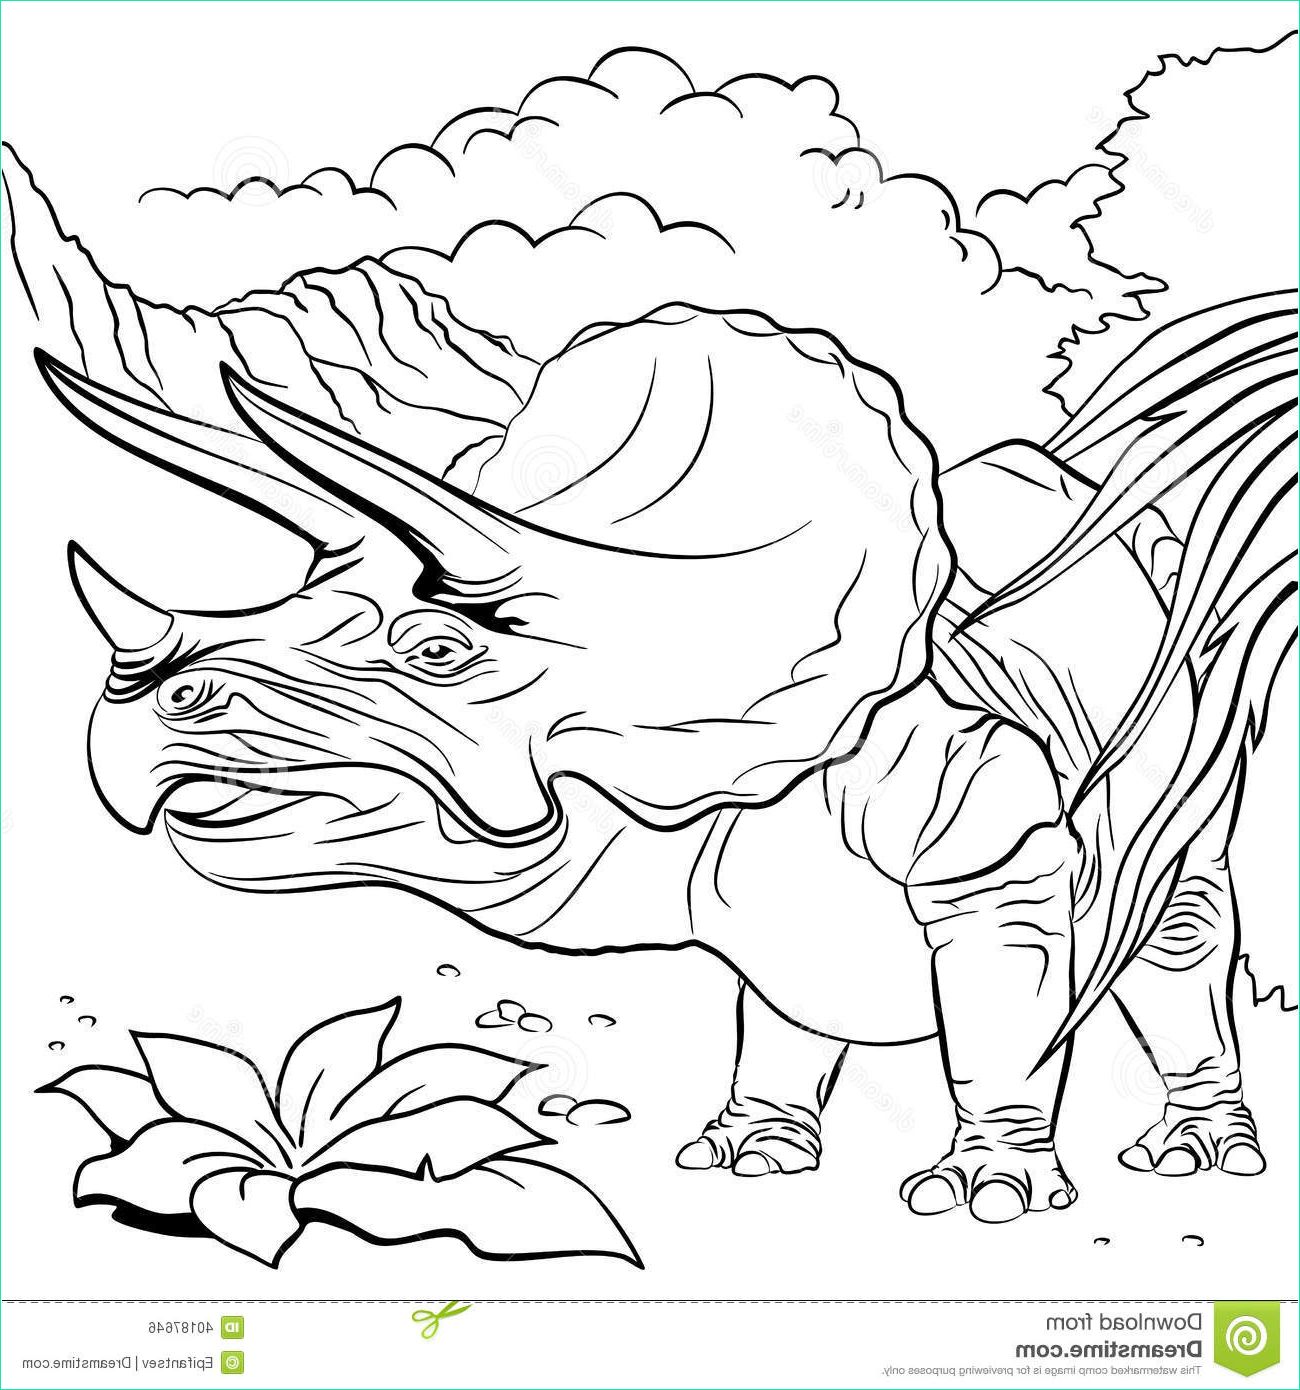 13 remarquable coloriage triceratops photos